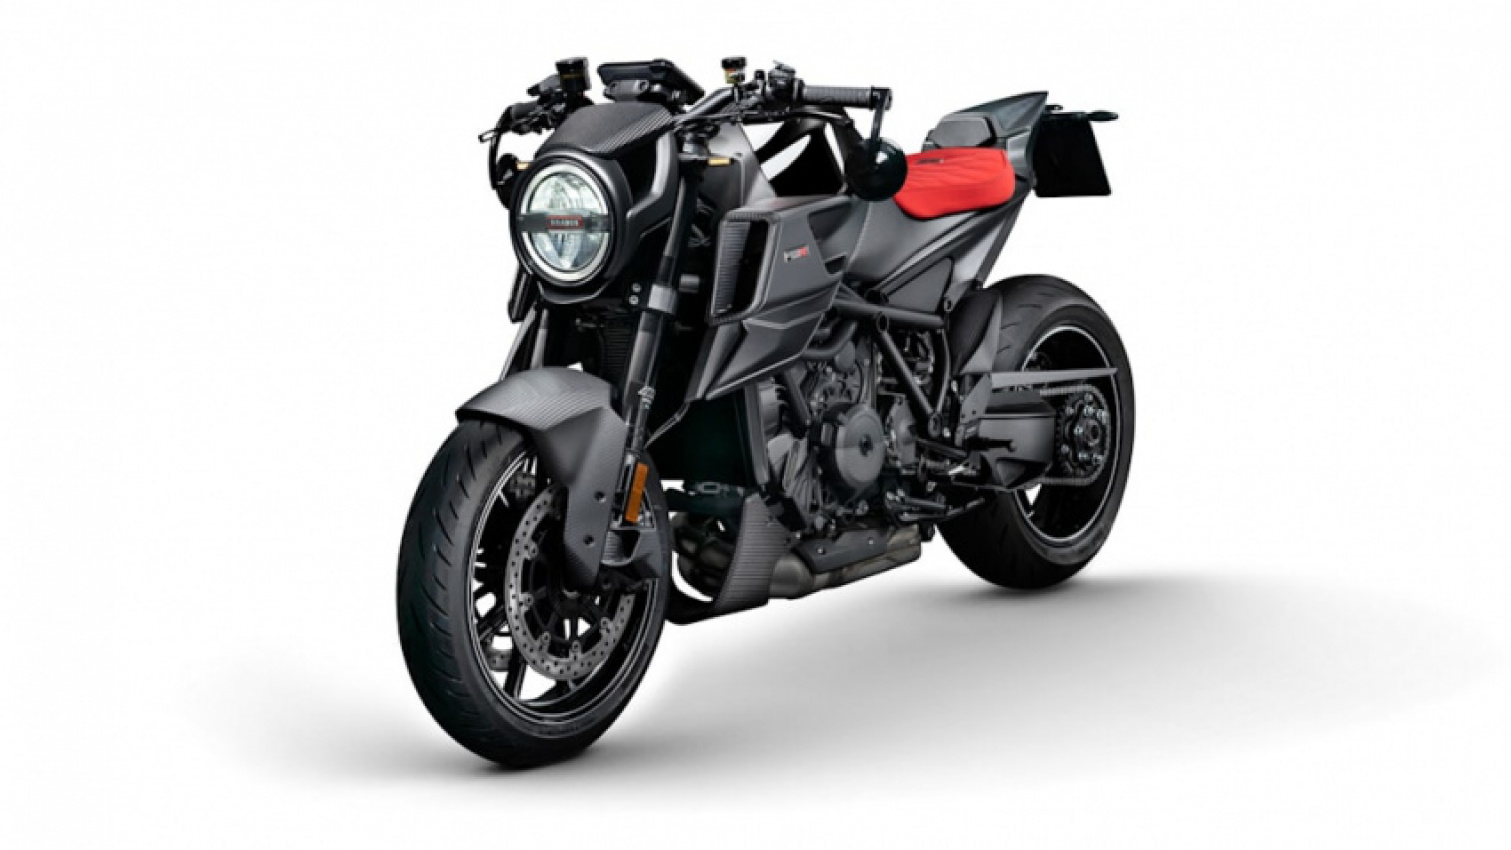 aftermarket, autos, cars, aftermarket, brabus, design/style, motorcycle, brabus 1300 r enters the motorcycle world with 180-horsepower